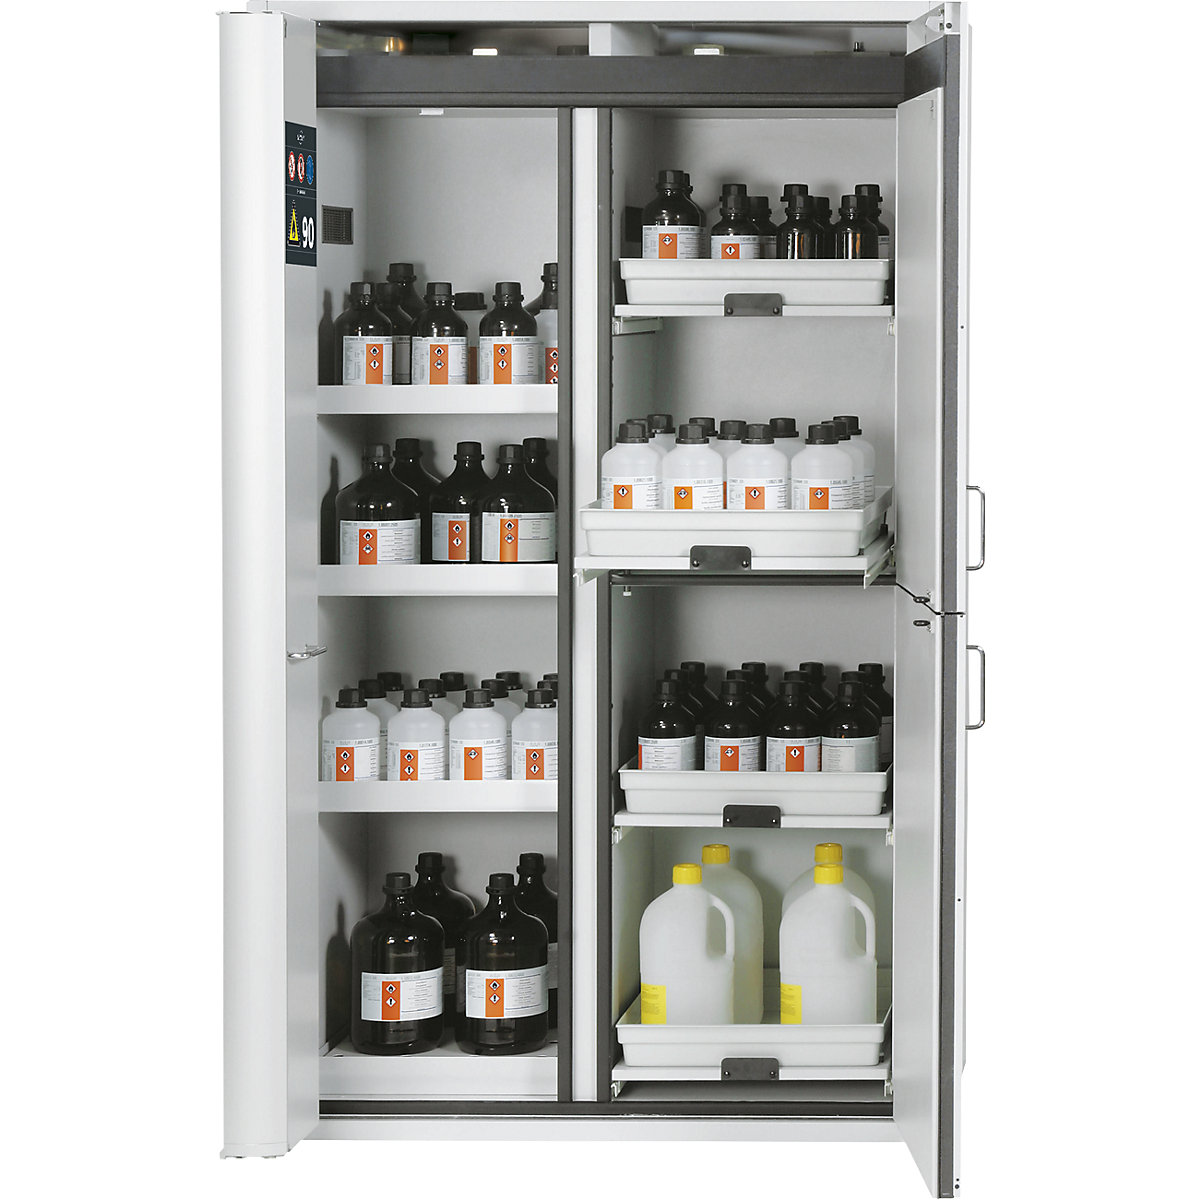 Type 90 safety combination cupboard - asecos